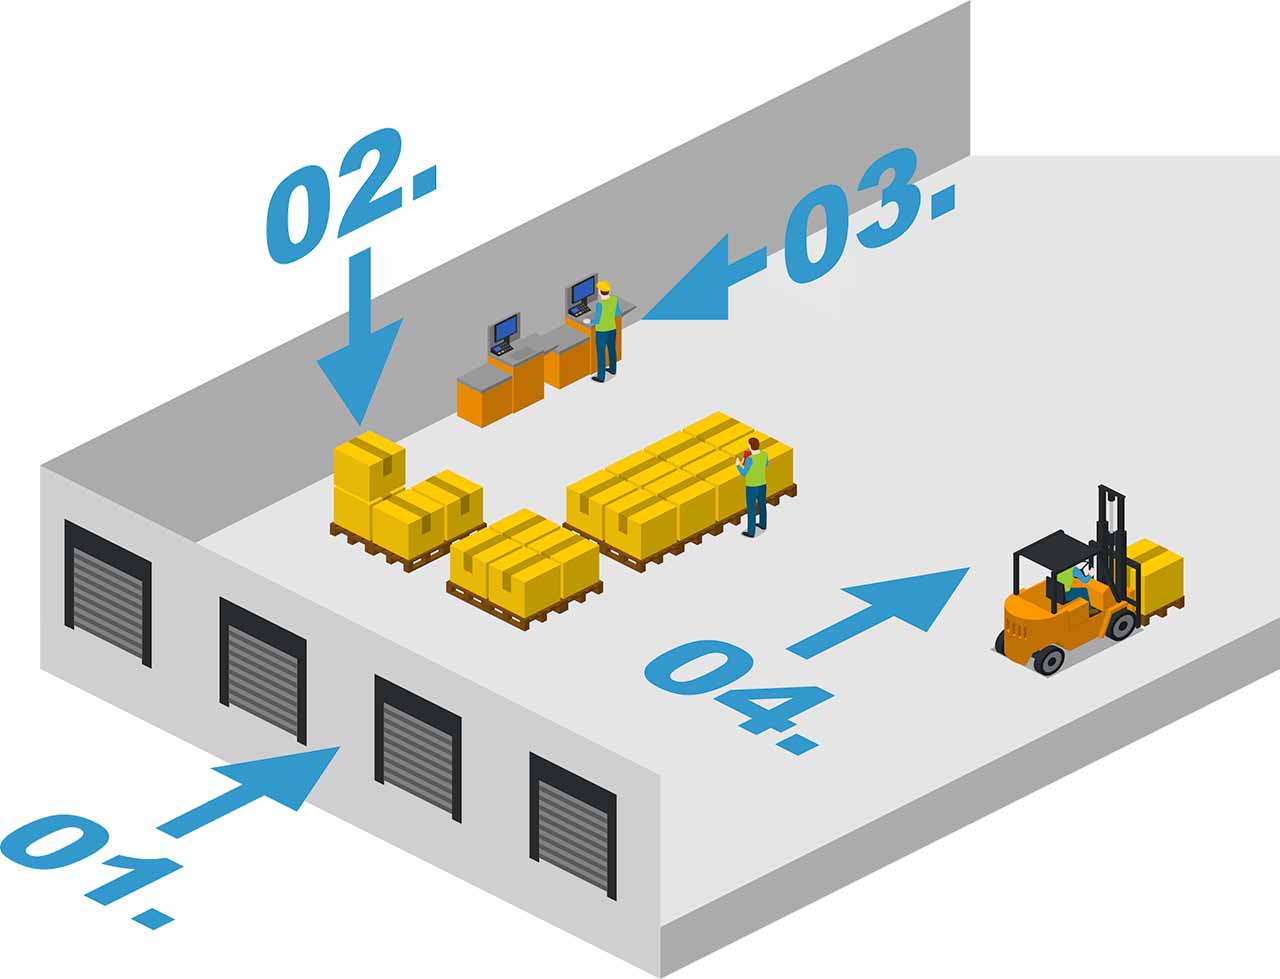 Anatomy of the 4 main areas in a warehouse receiving department